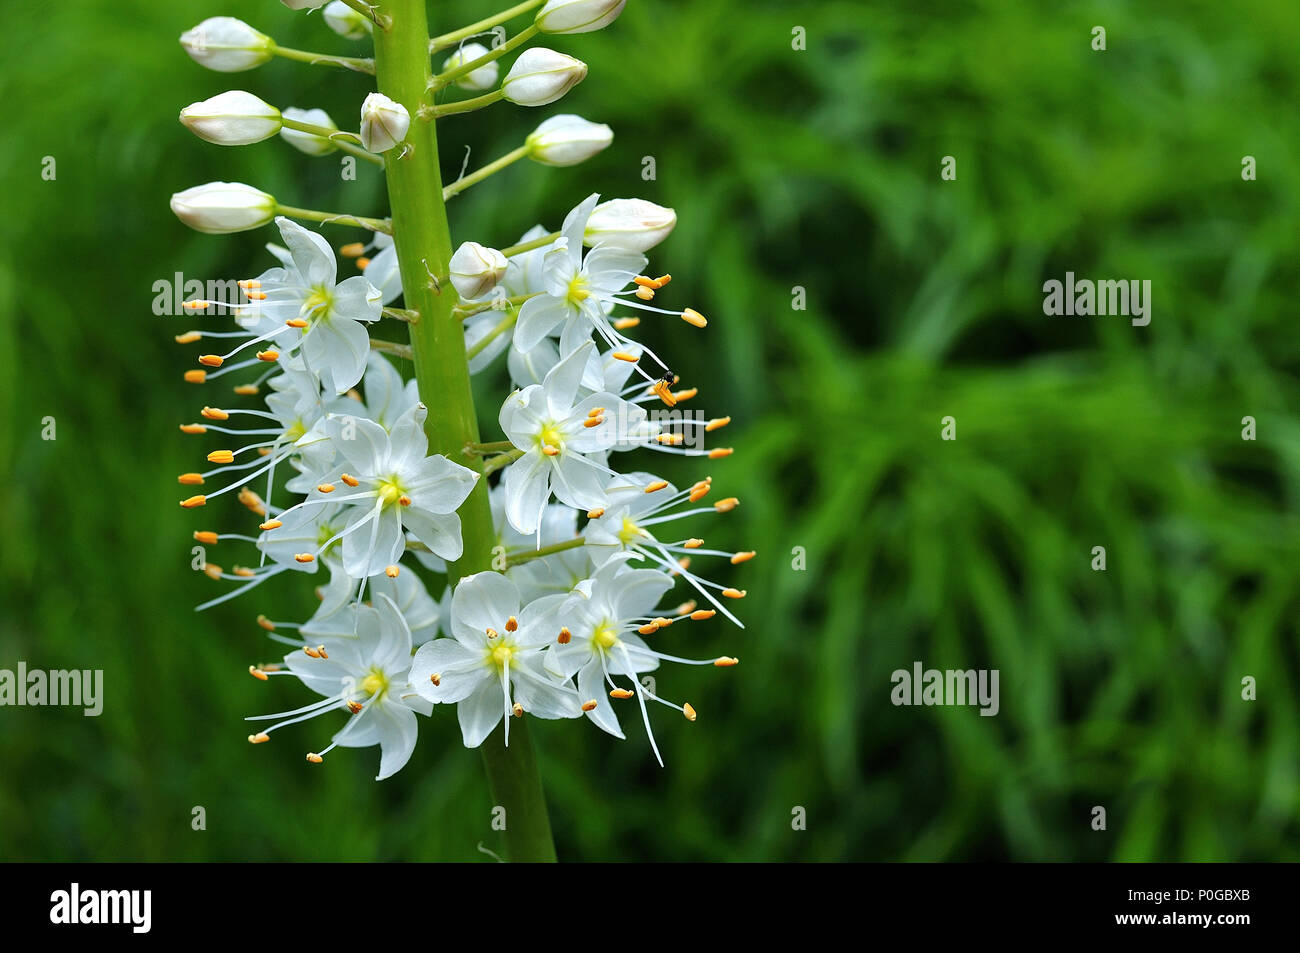 close up of stem and blossoms of a foxtail lily with white petals and yellow stamens Stock Photo